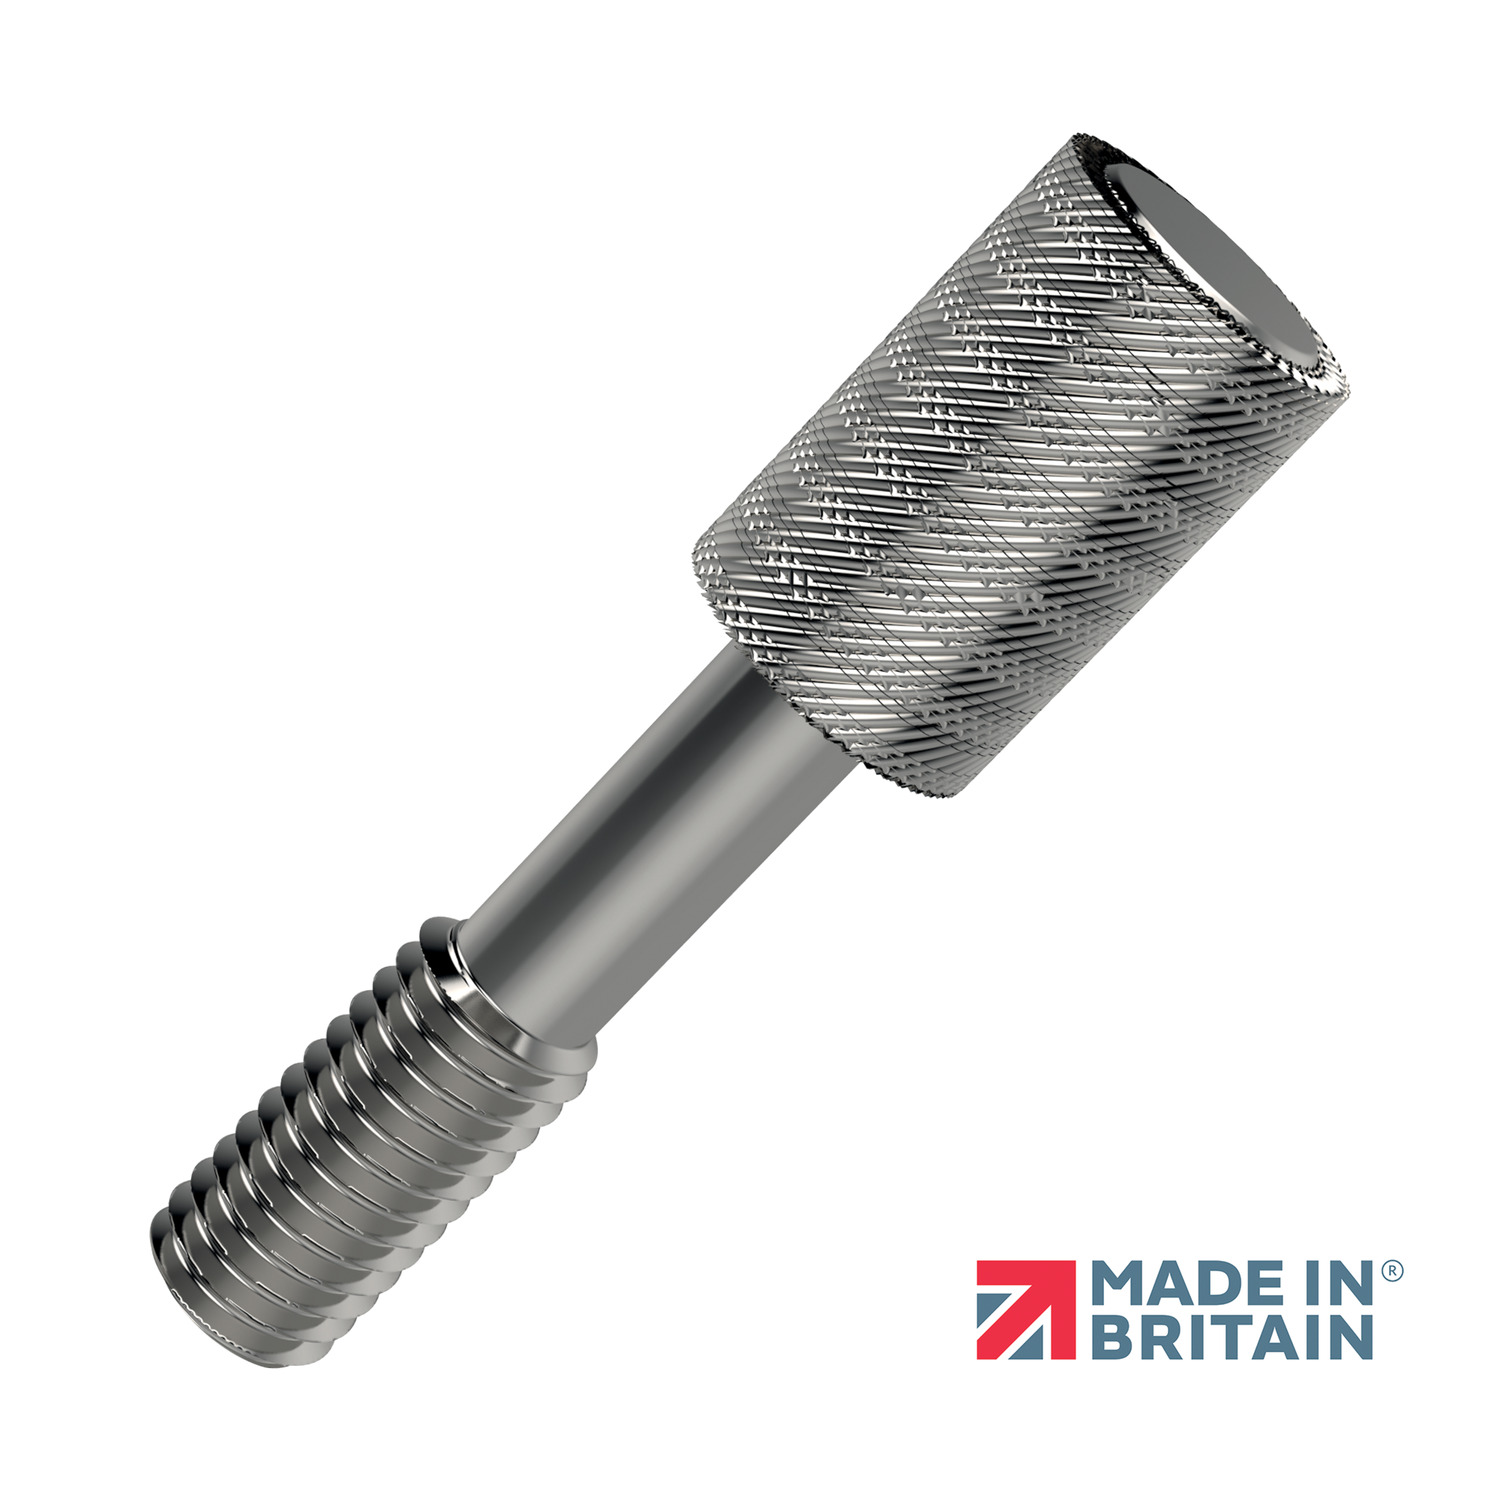 Captive Thumb Screws Our thin head captive thumb screws are generally produced in AISI 303 and 316 series stainless steel. Also in titanium or with blackened finish. Standard thread sizes are M3 - M6, with lengths 16 - 50mm. Bespoke orders to customer drawings can be processed.